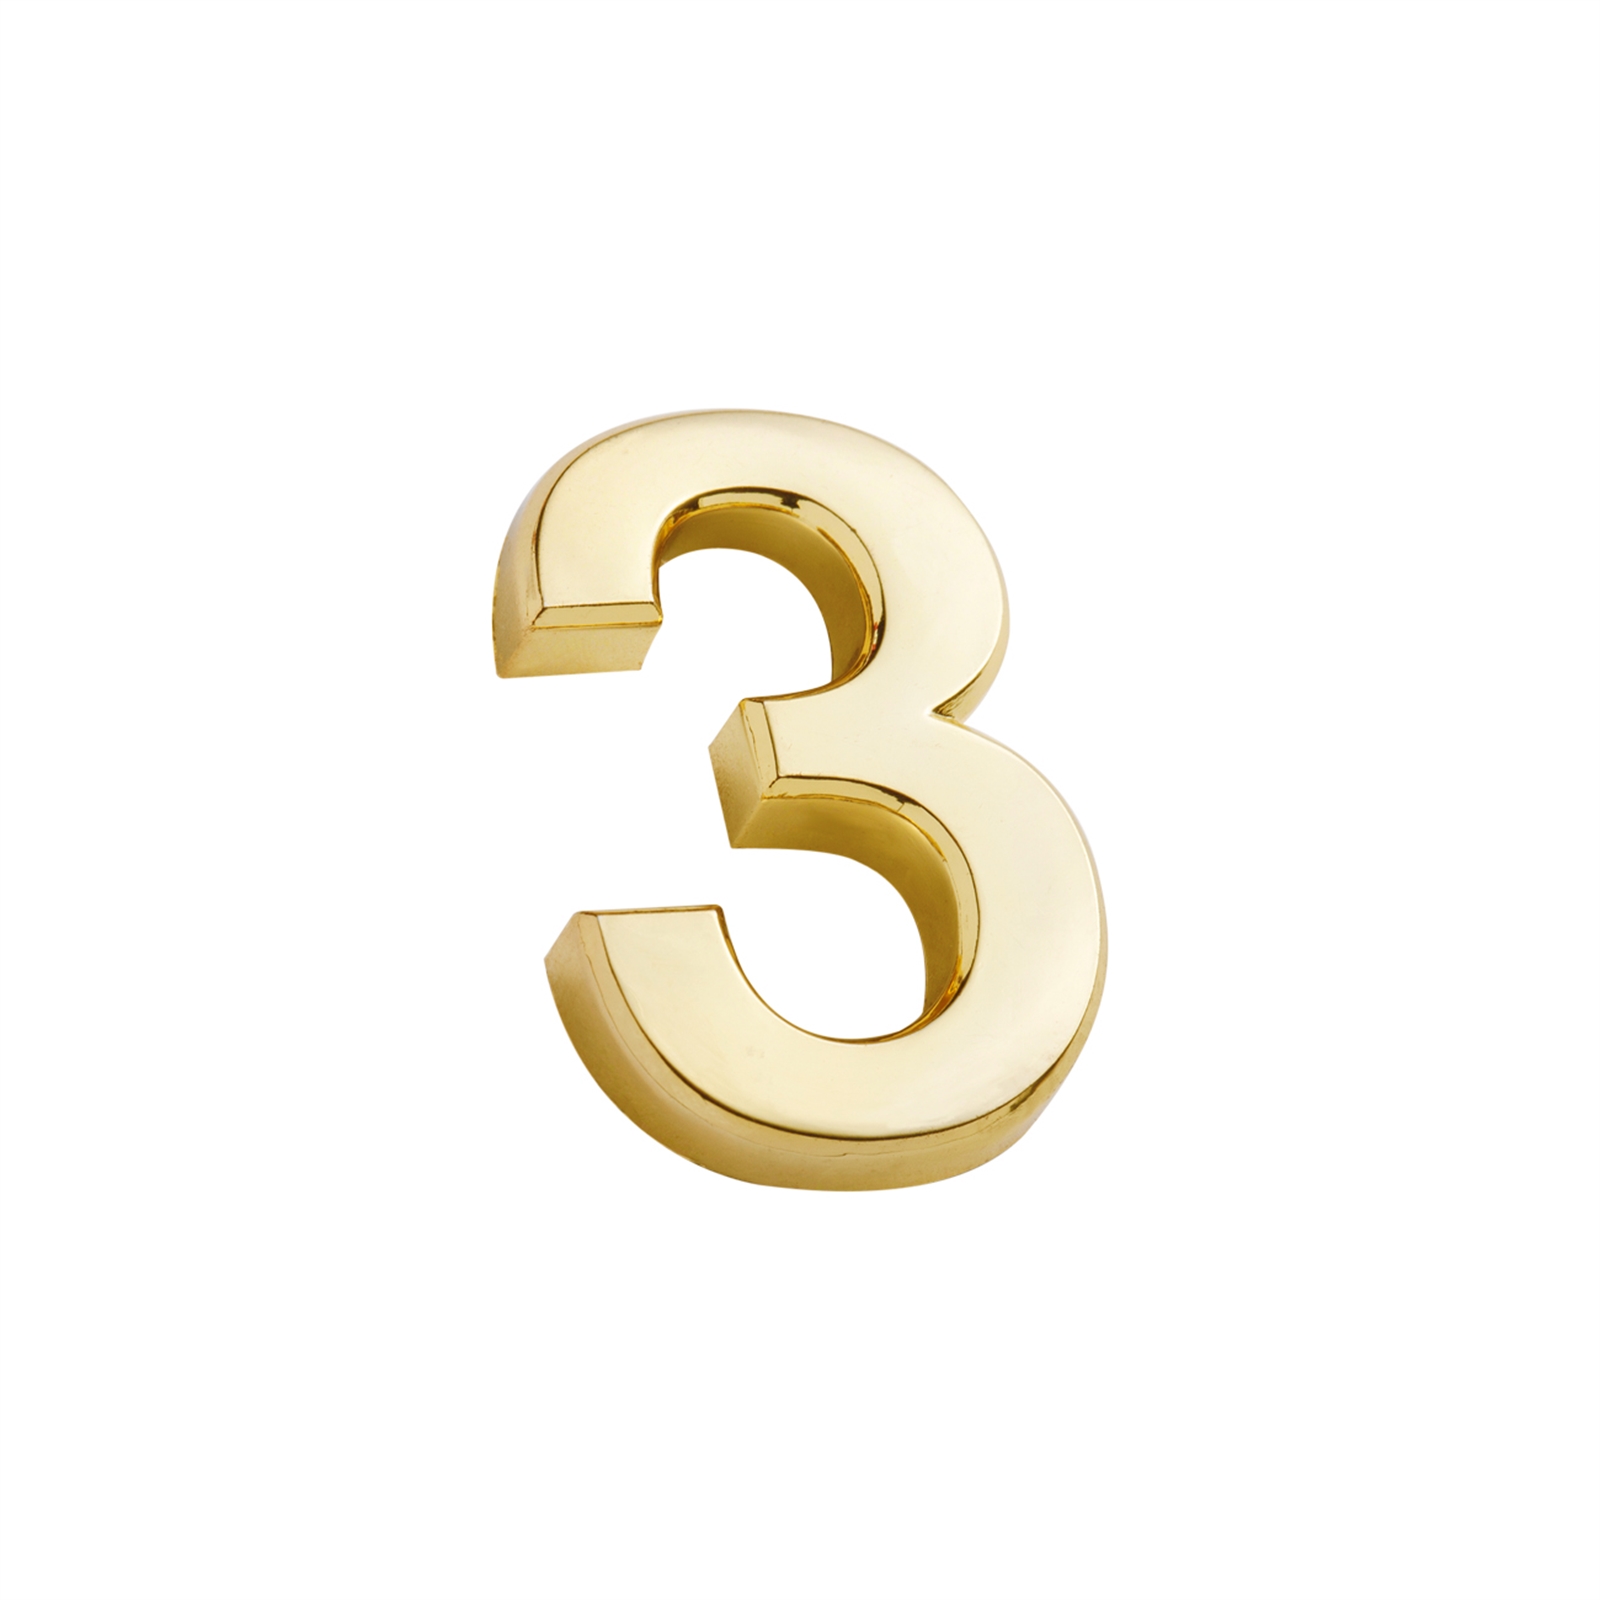 Sandleford 35mm 3 Gold Self Adhesive Harbour Numeral